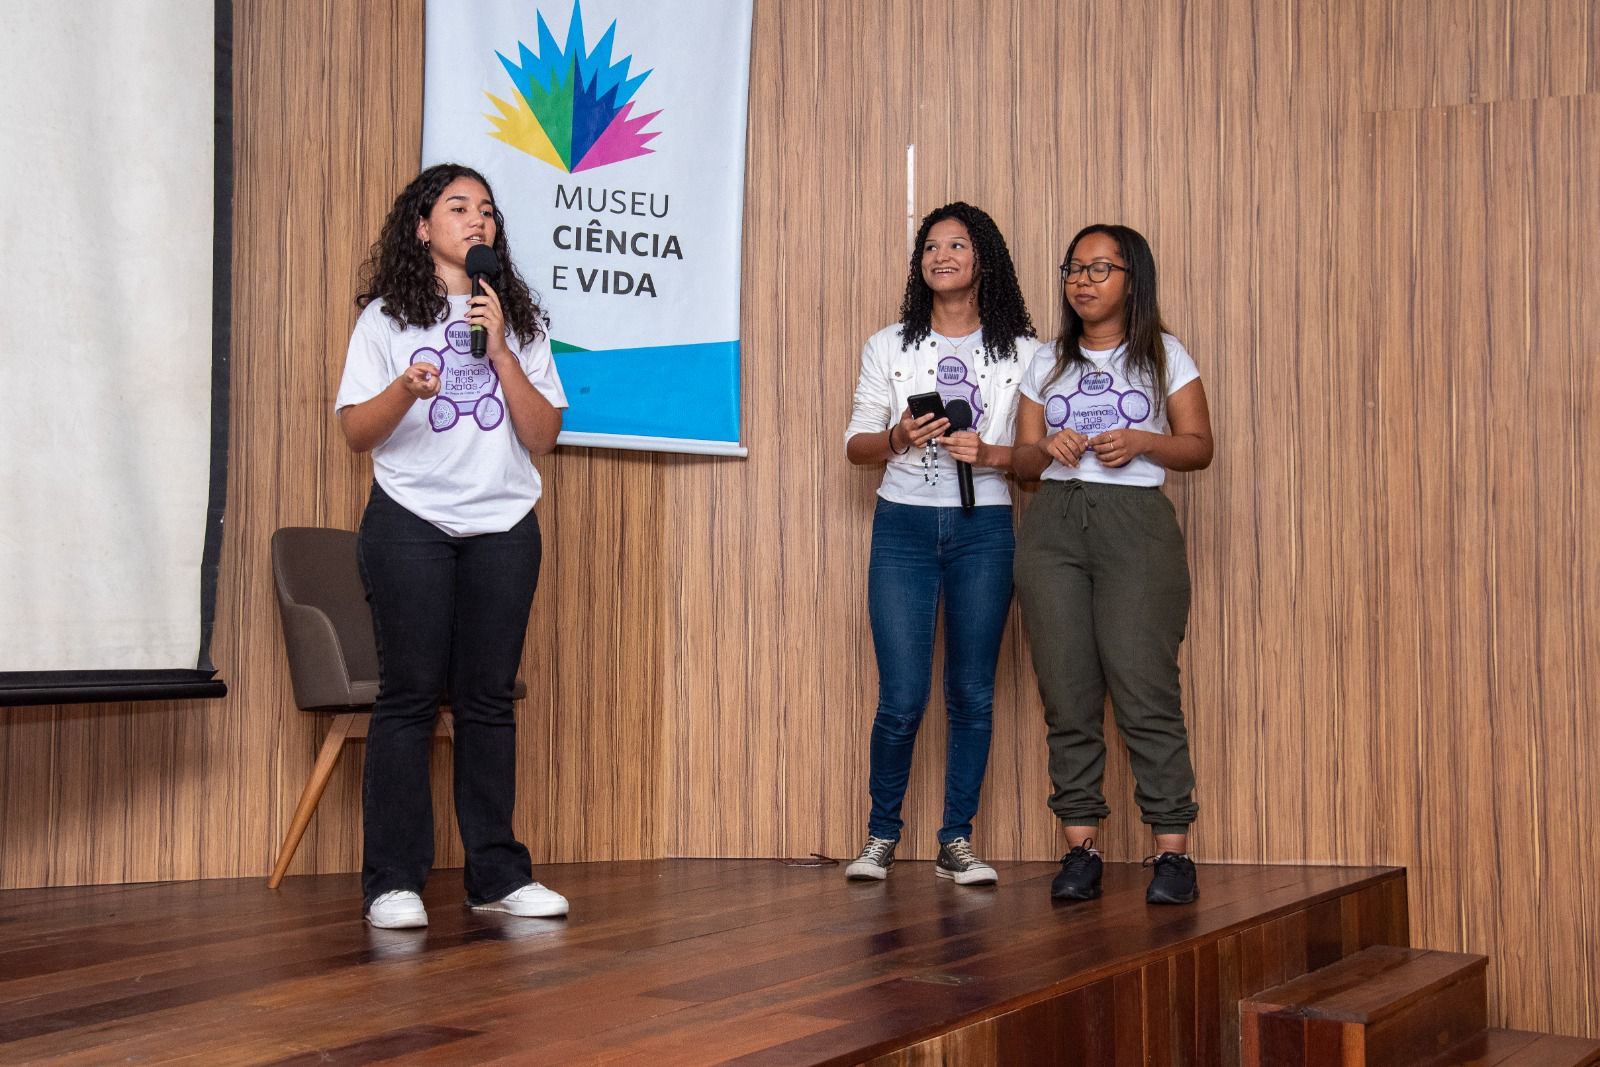 Students from Colégio Estadual Círculo Operário give a presentation about the Science Club at the Museum of Science and Life